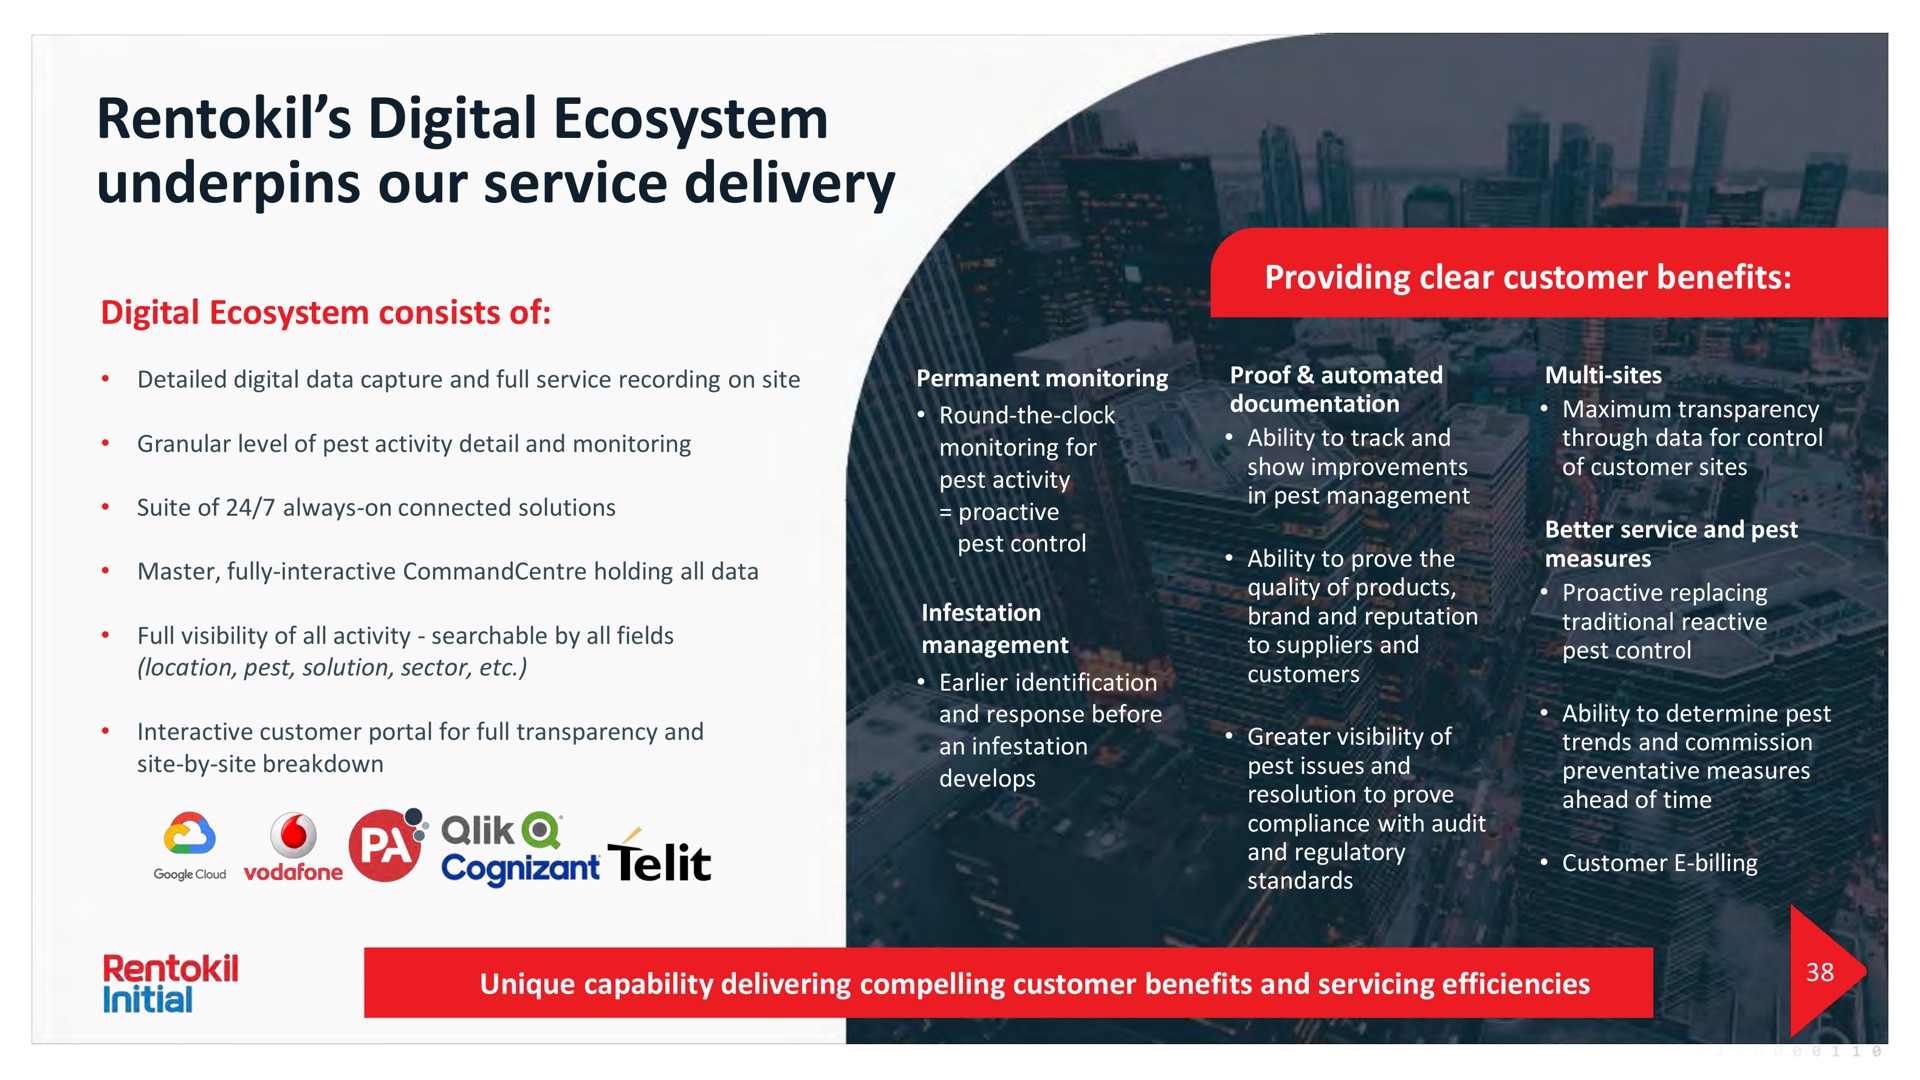 digital ecosystem underpins our service delivery digital ecosystem consists of providing clear customer benefits | Rentokil Initial